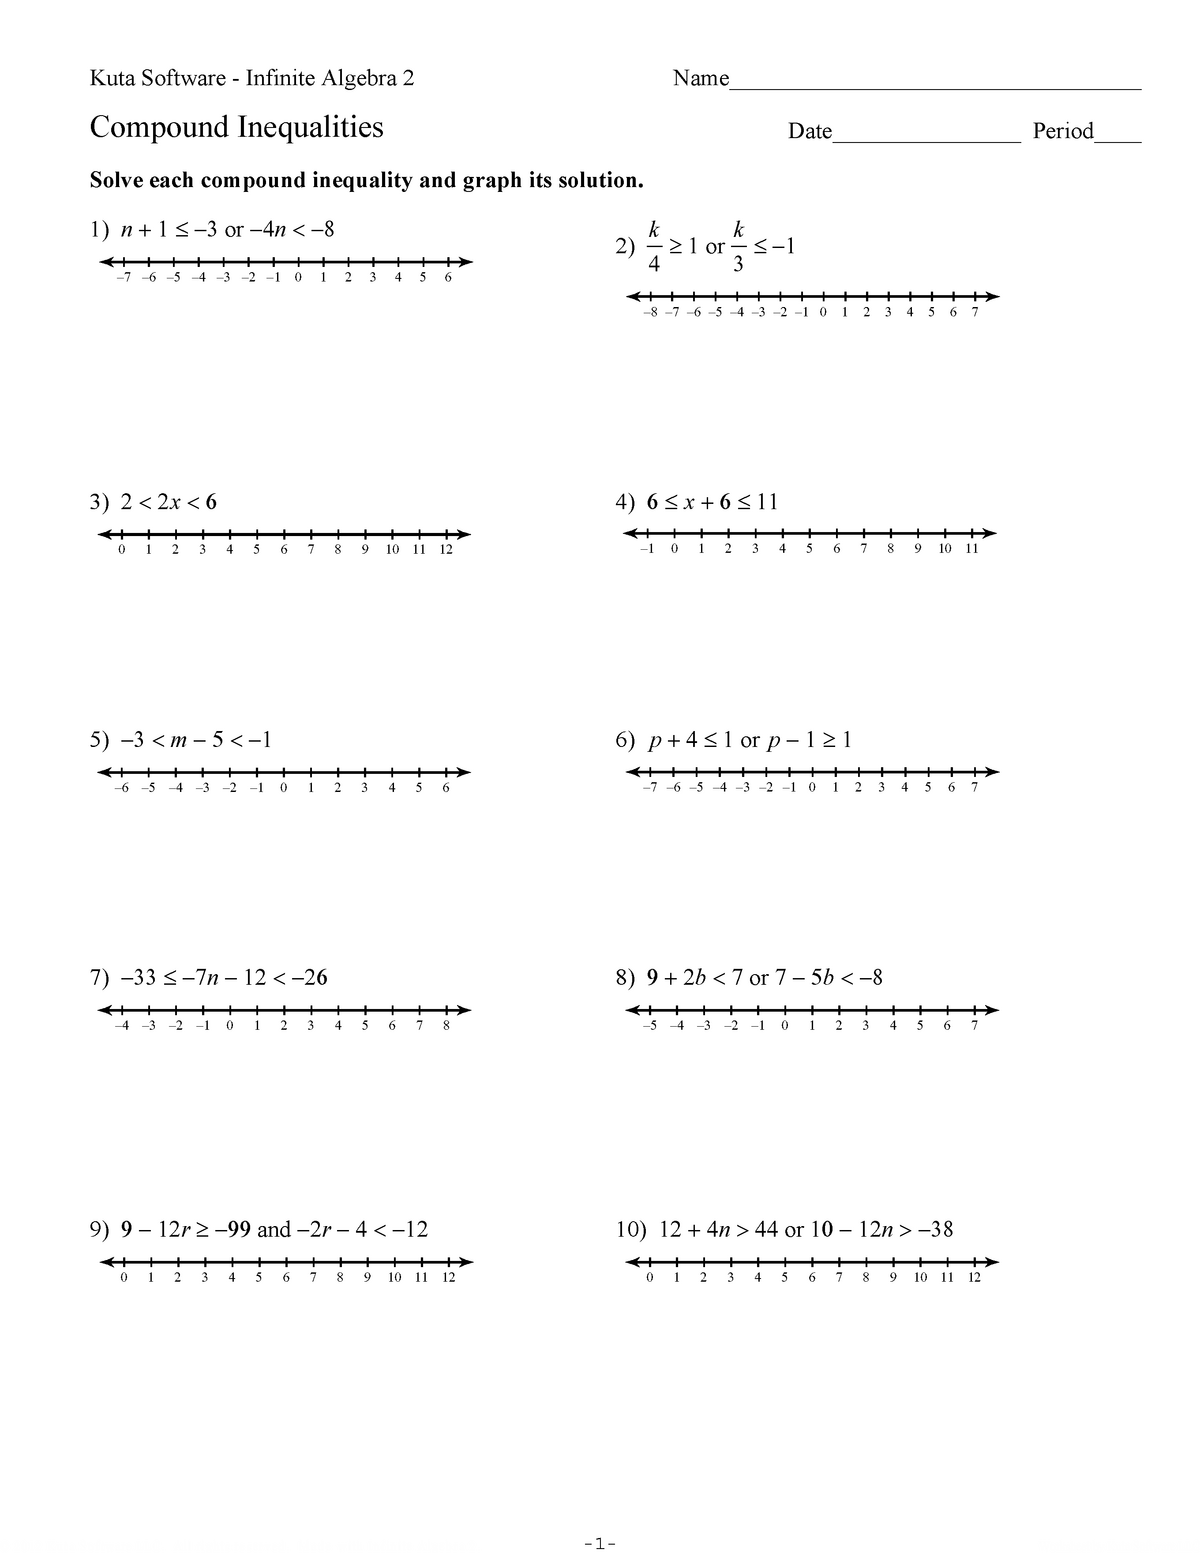 Compound Inequalities Lecture Notes 22222222 - ©z k 2222 b 2222 w 2222 j 2222 D SK With Regard To Compound Inequalities Worksheet Answers